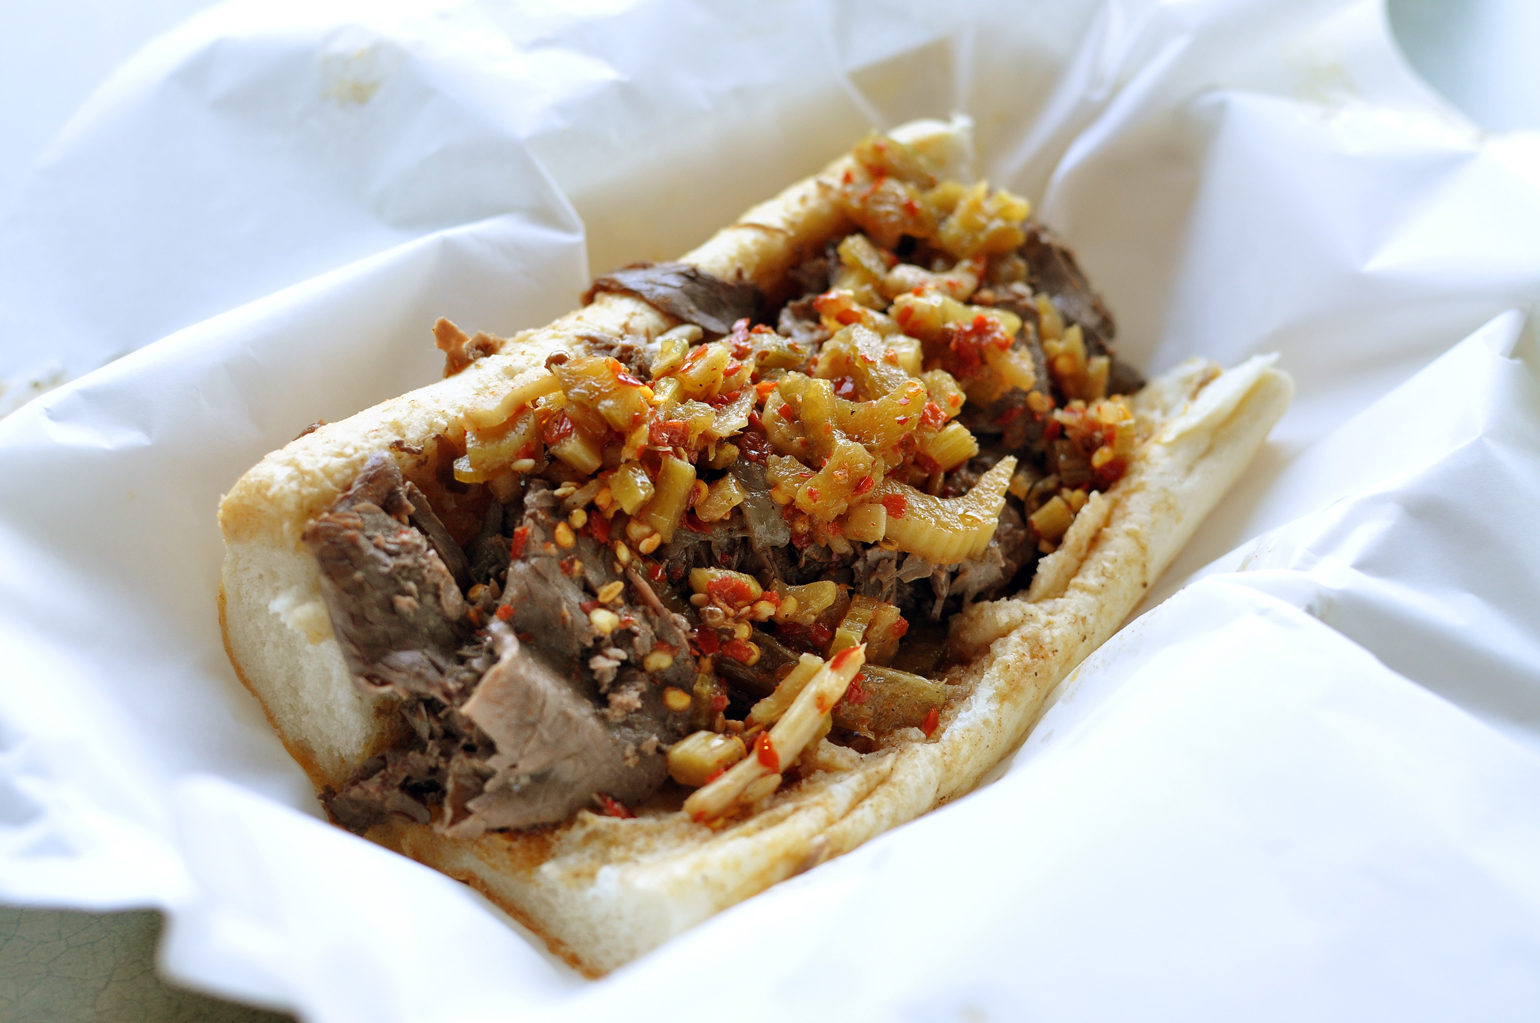 Here’s the Real Story Behind Chicago’s Own Italian Beef Sandwich — Plus the 7 Best Places to Get One